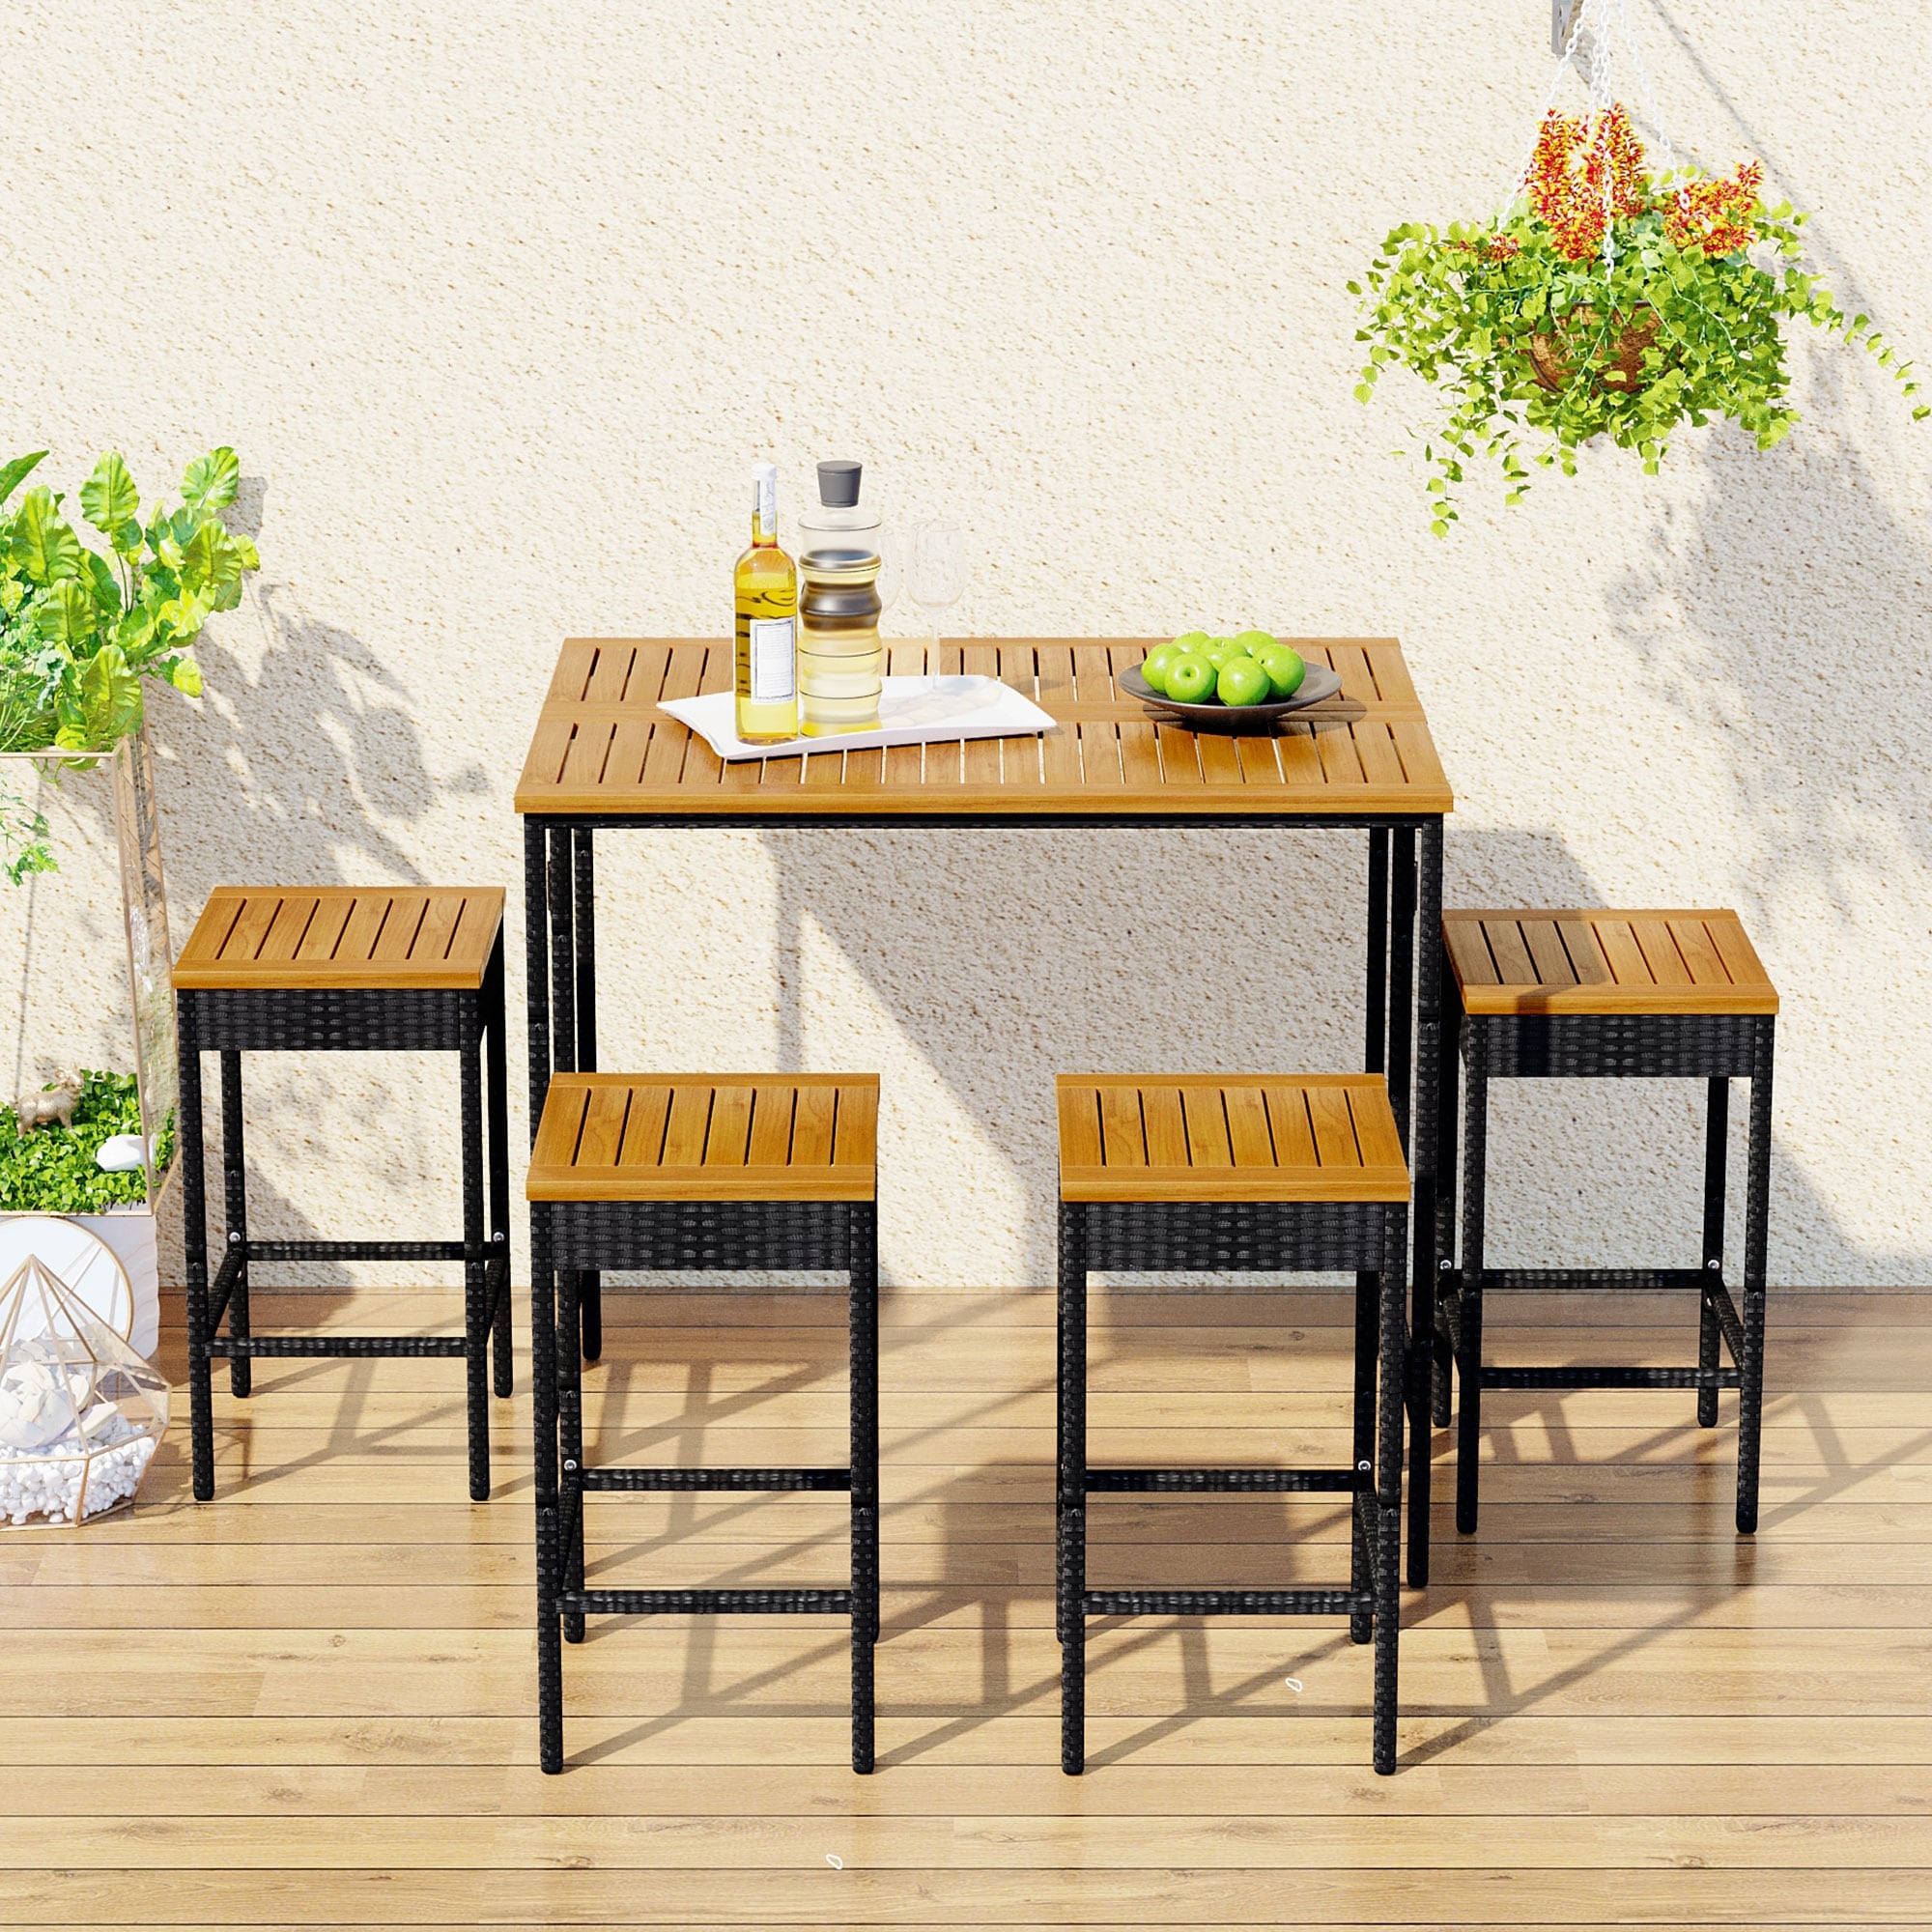 5-piece Wood Outdoor Patio Dining Sets  Garden Pe Rattan Wicker Dining Table